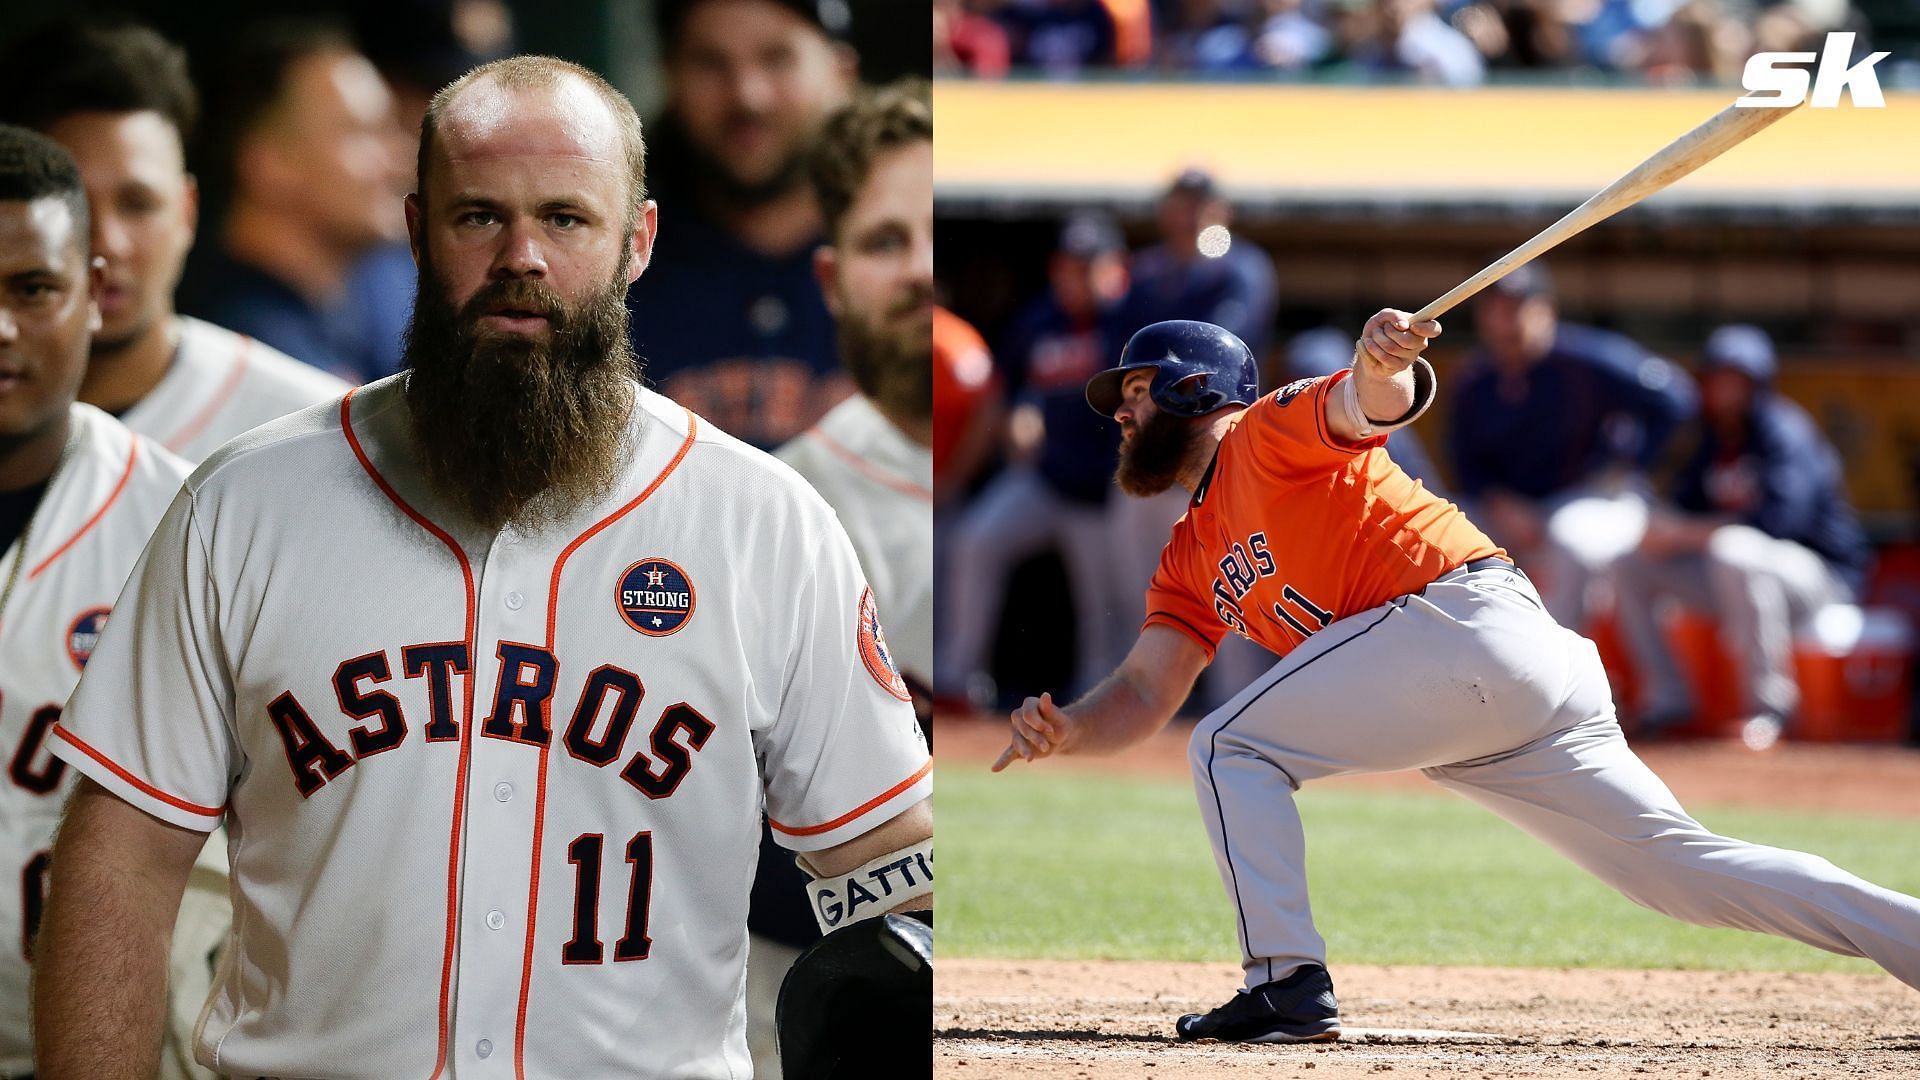 The search for Evan Gattis -- TELLING THE STORY